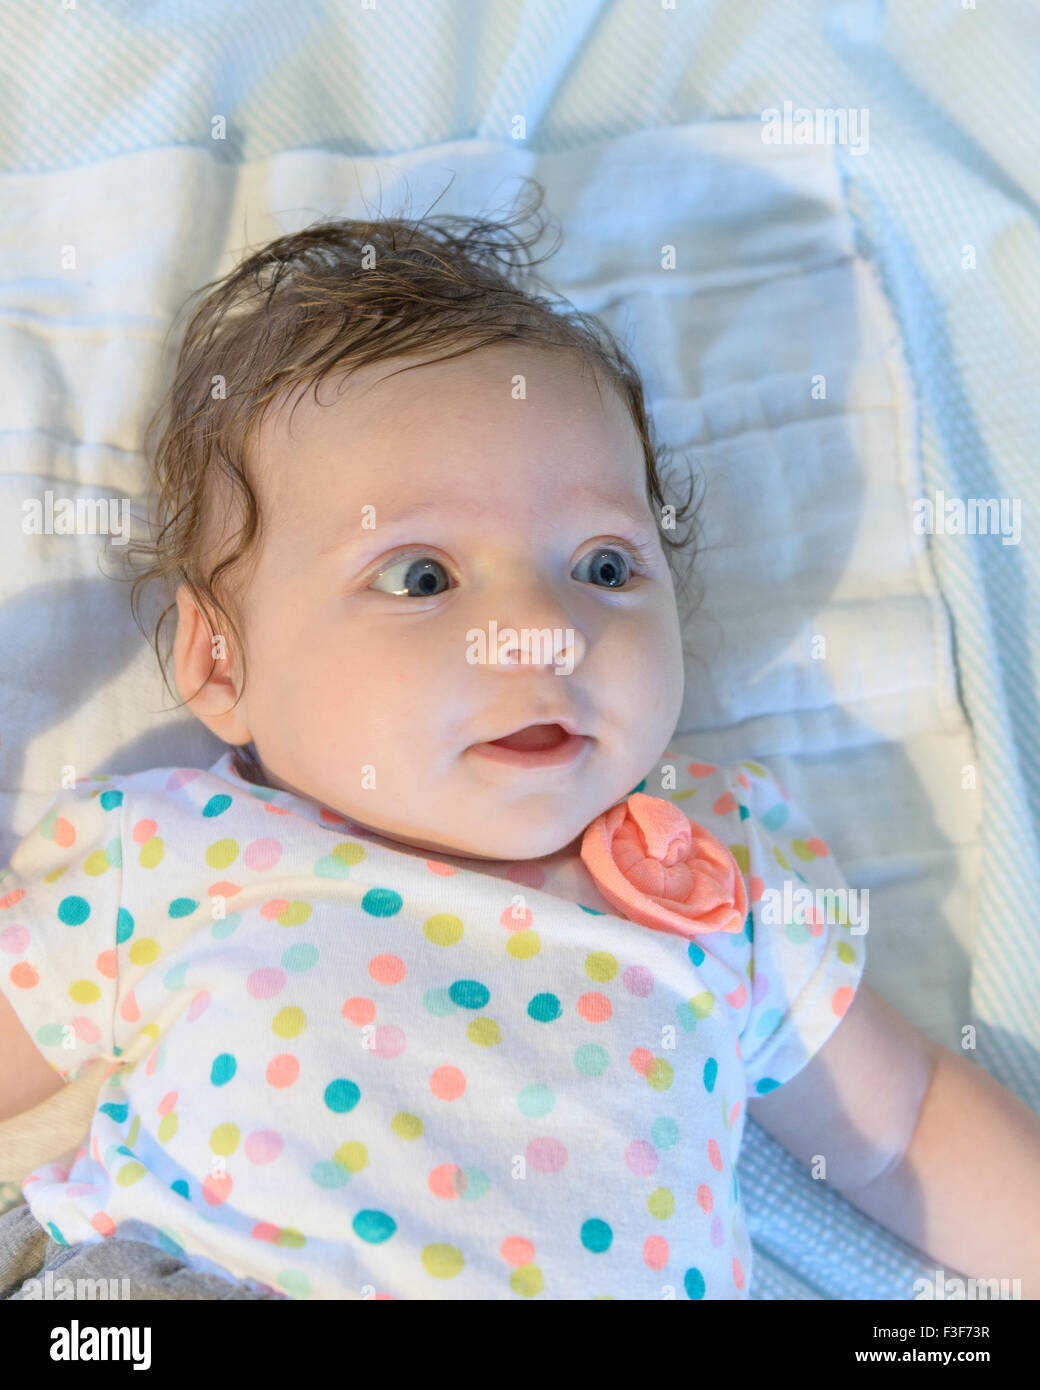 A three month old infant Caucasian girl with dark hair and blue eyes. Closeup. Stock Photo